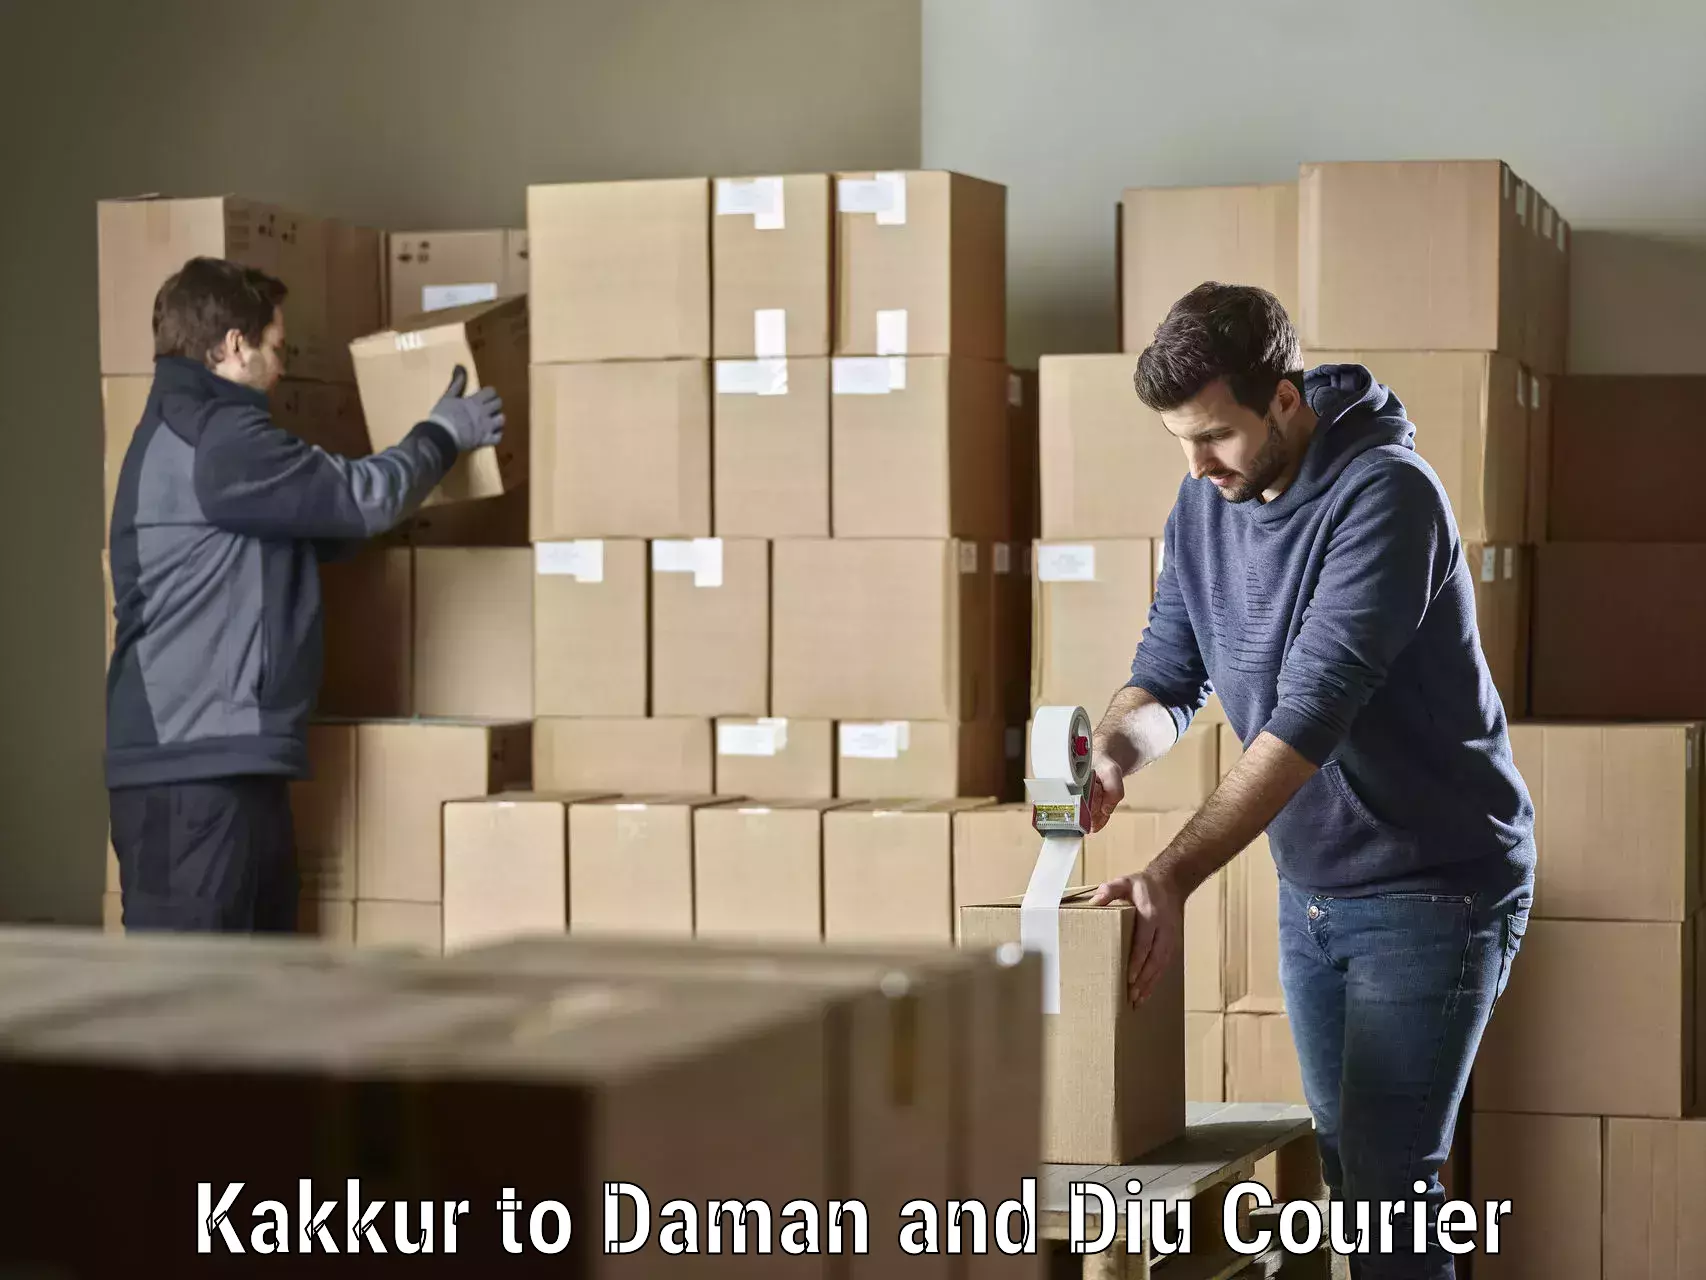 Cash on delivery service Kakkur to Daman and Diu